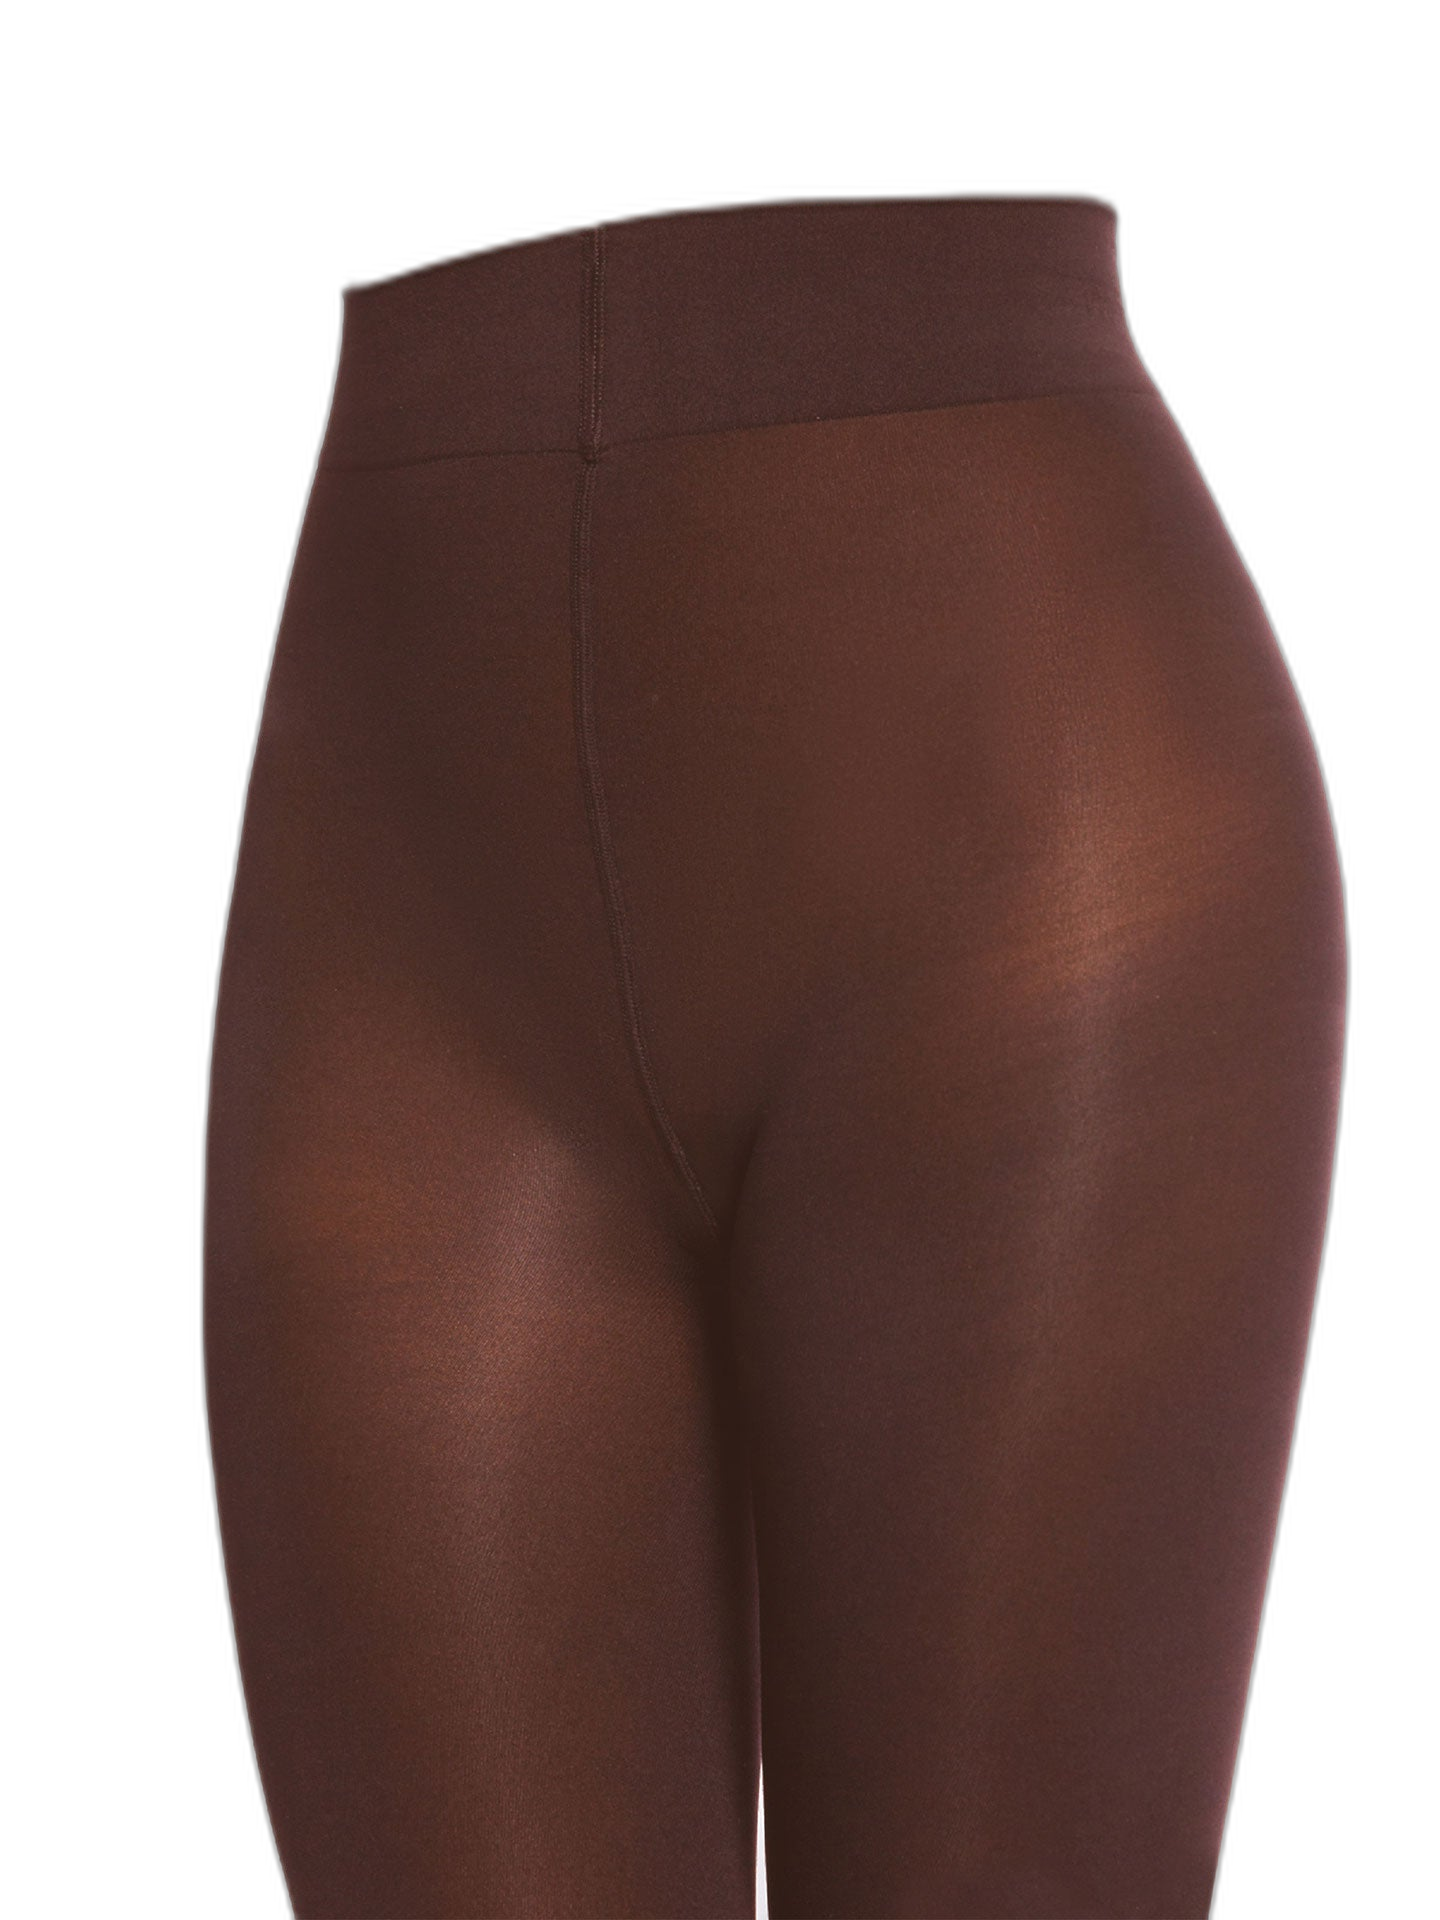 136891 | Wolford - Satin Touch 20 Comfort Coconut